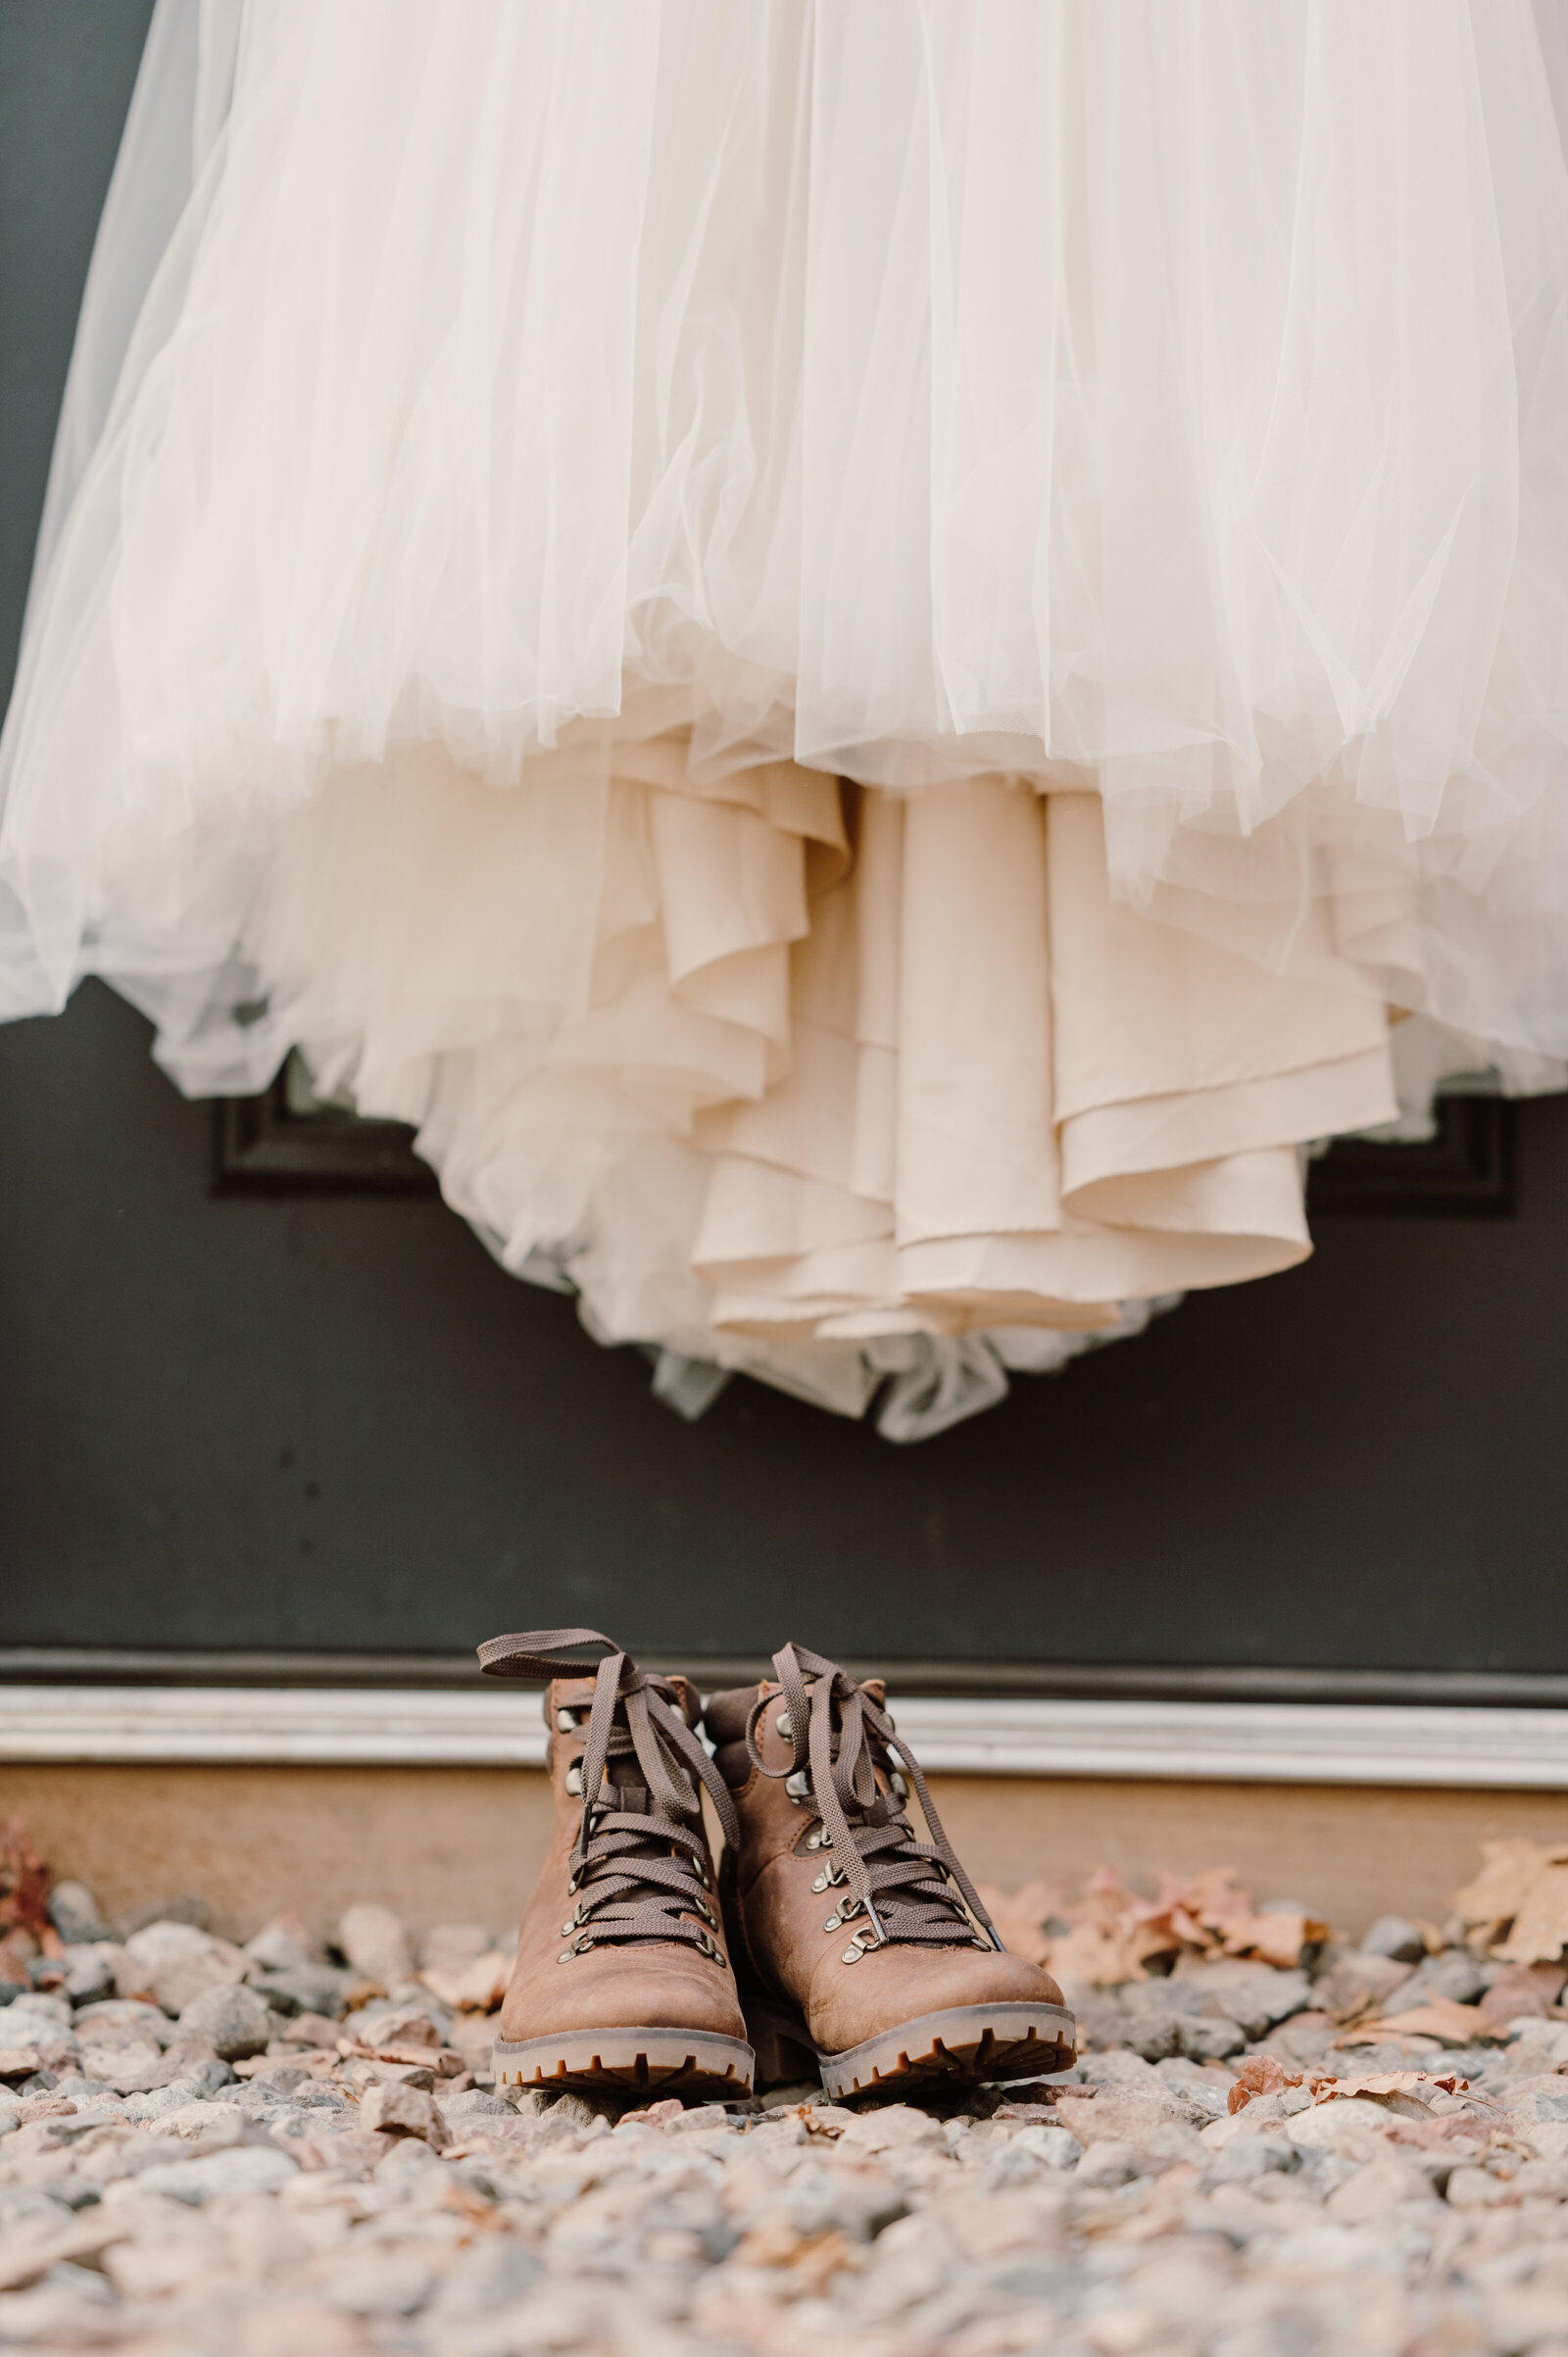 Bride's footwear for the their elopement day